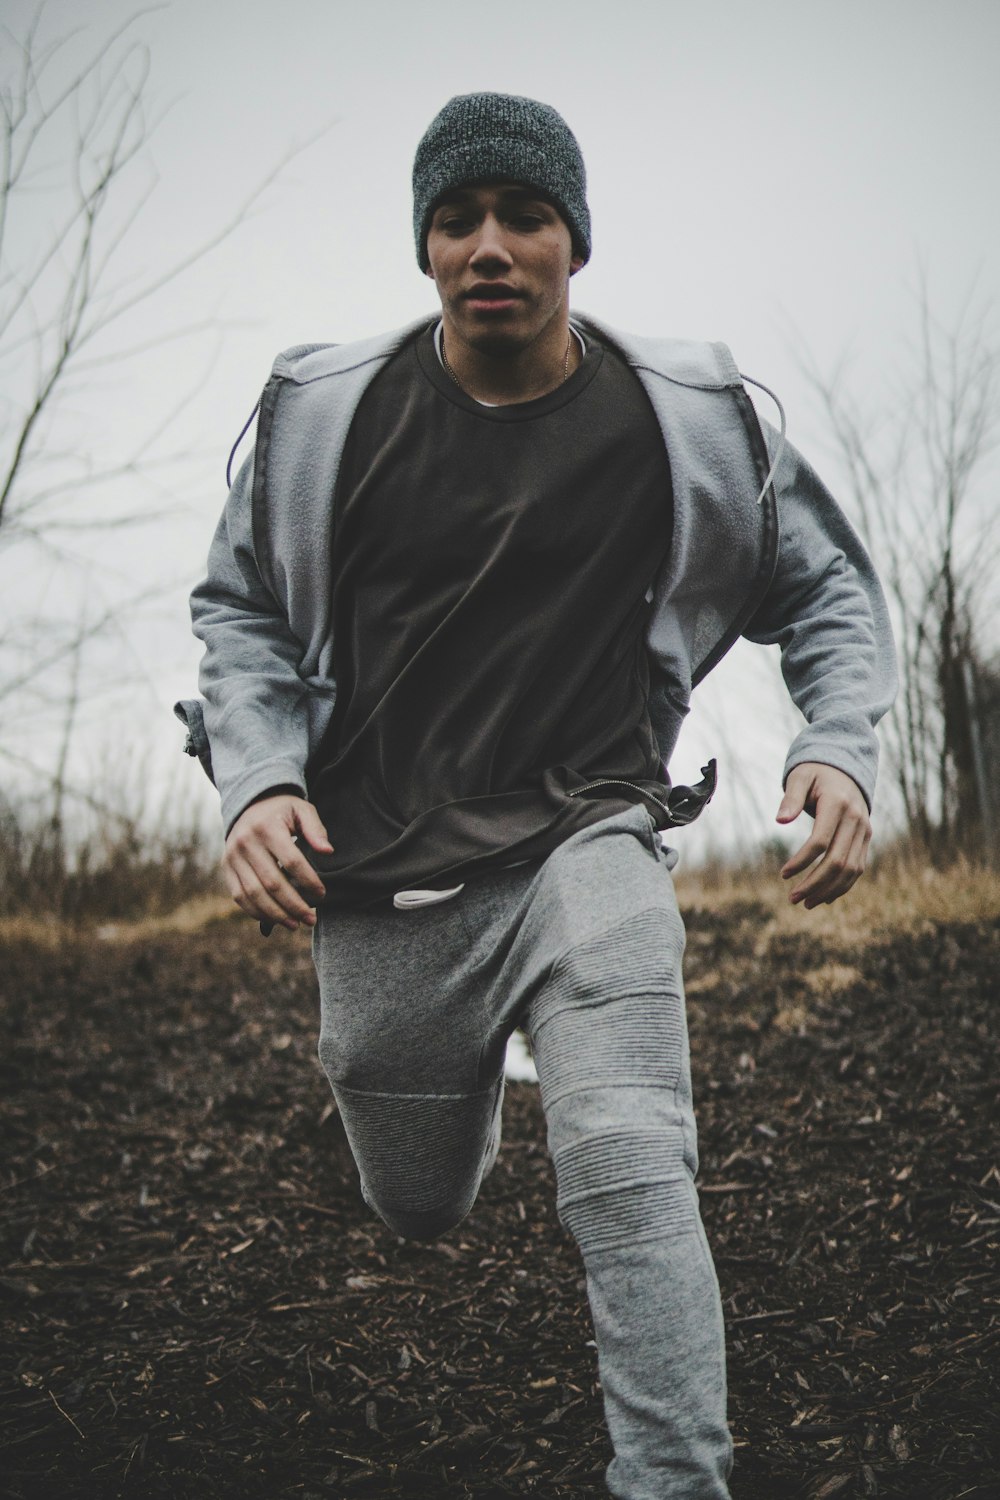 man wearing black shirt and gray jacket with pants while running into plain field